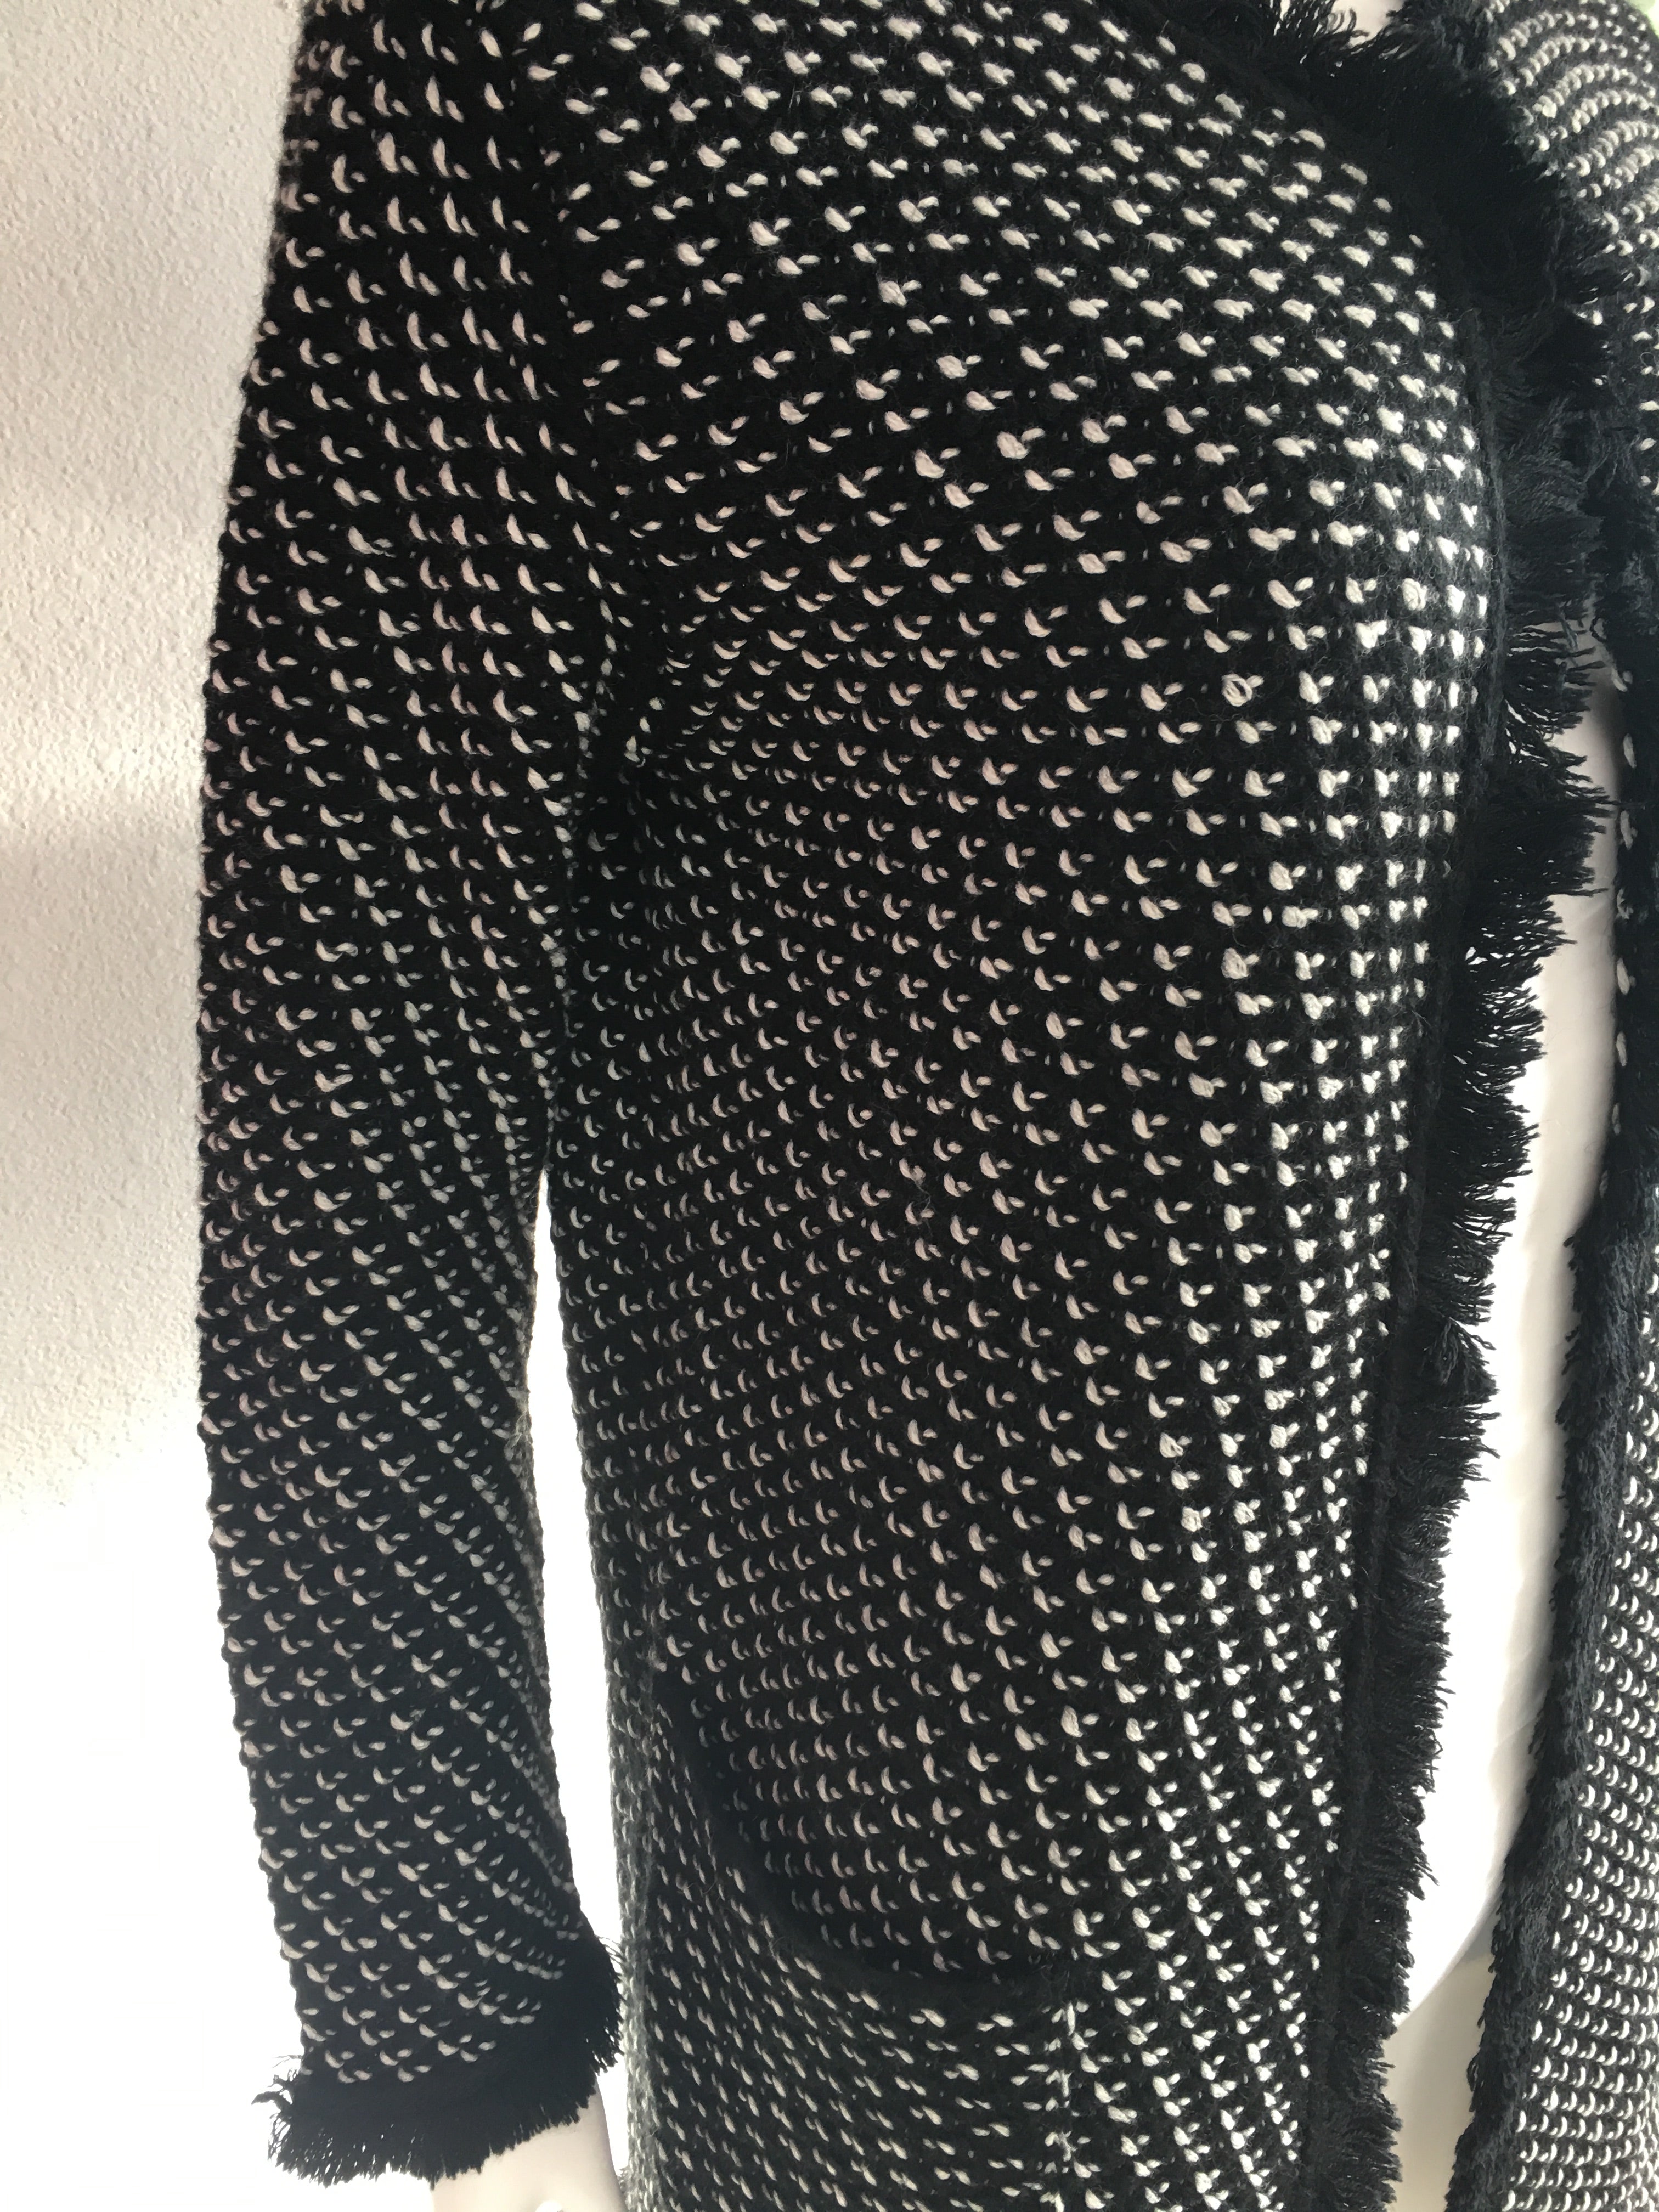 Black and white knitted sweater - Vanity's Vault